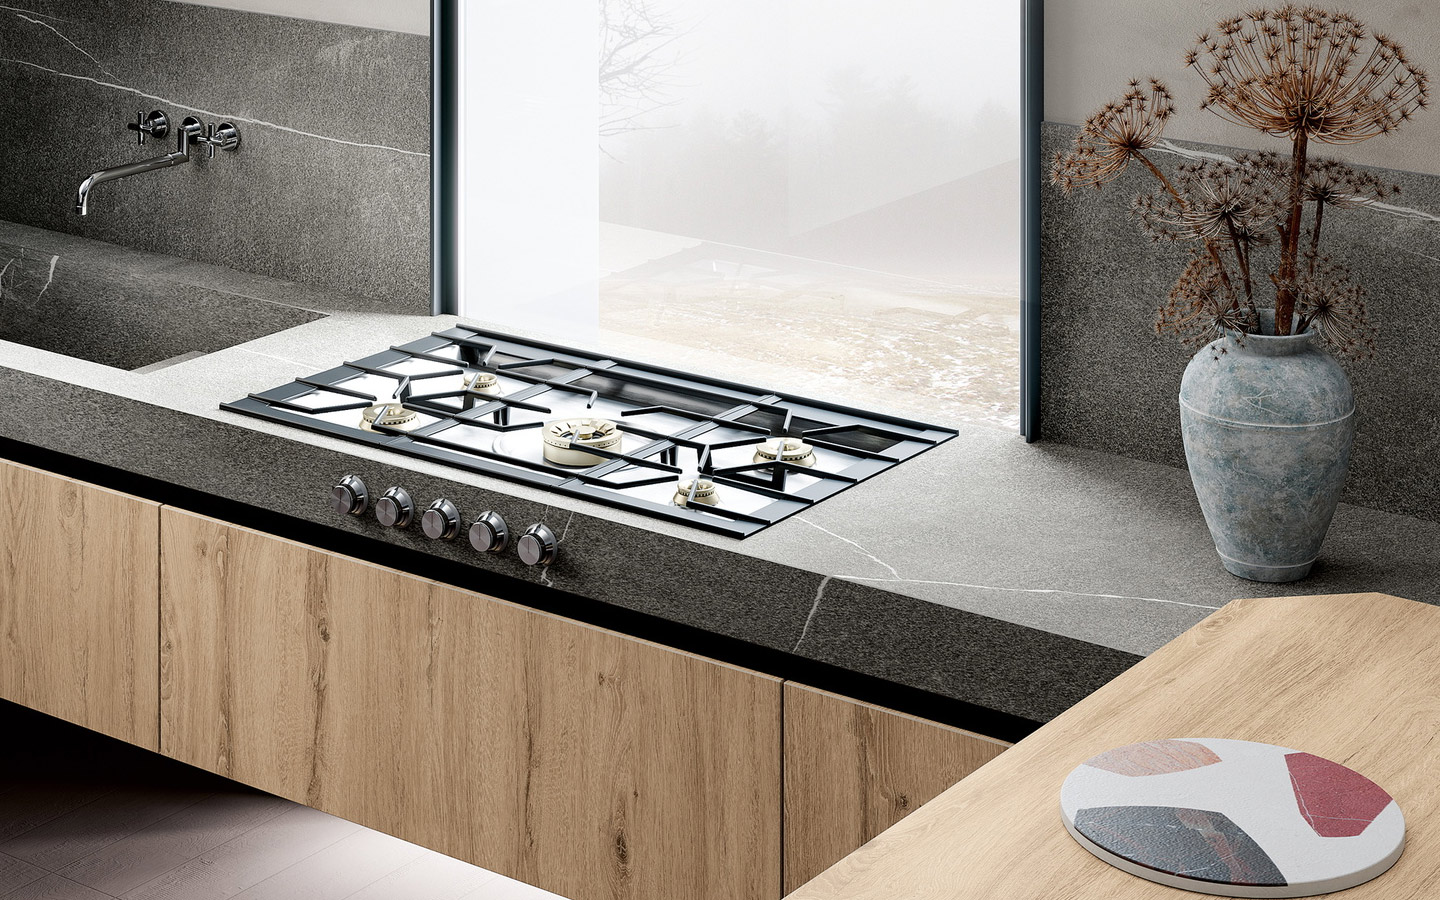 Customized Stainless Steel Worktop With Integrated Gas Hob